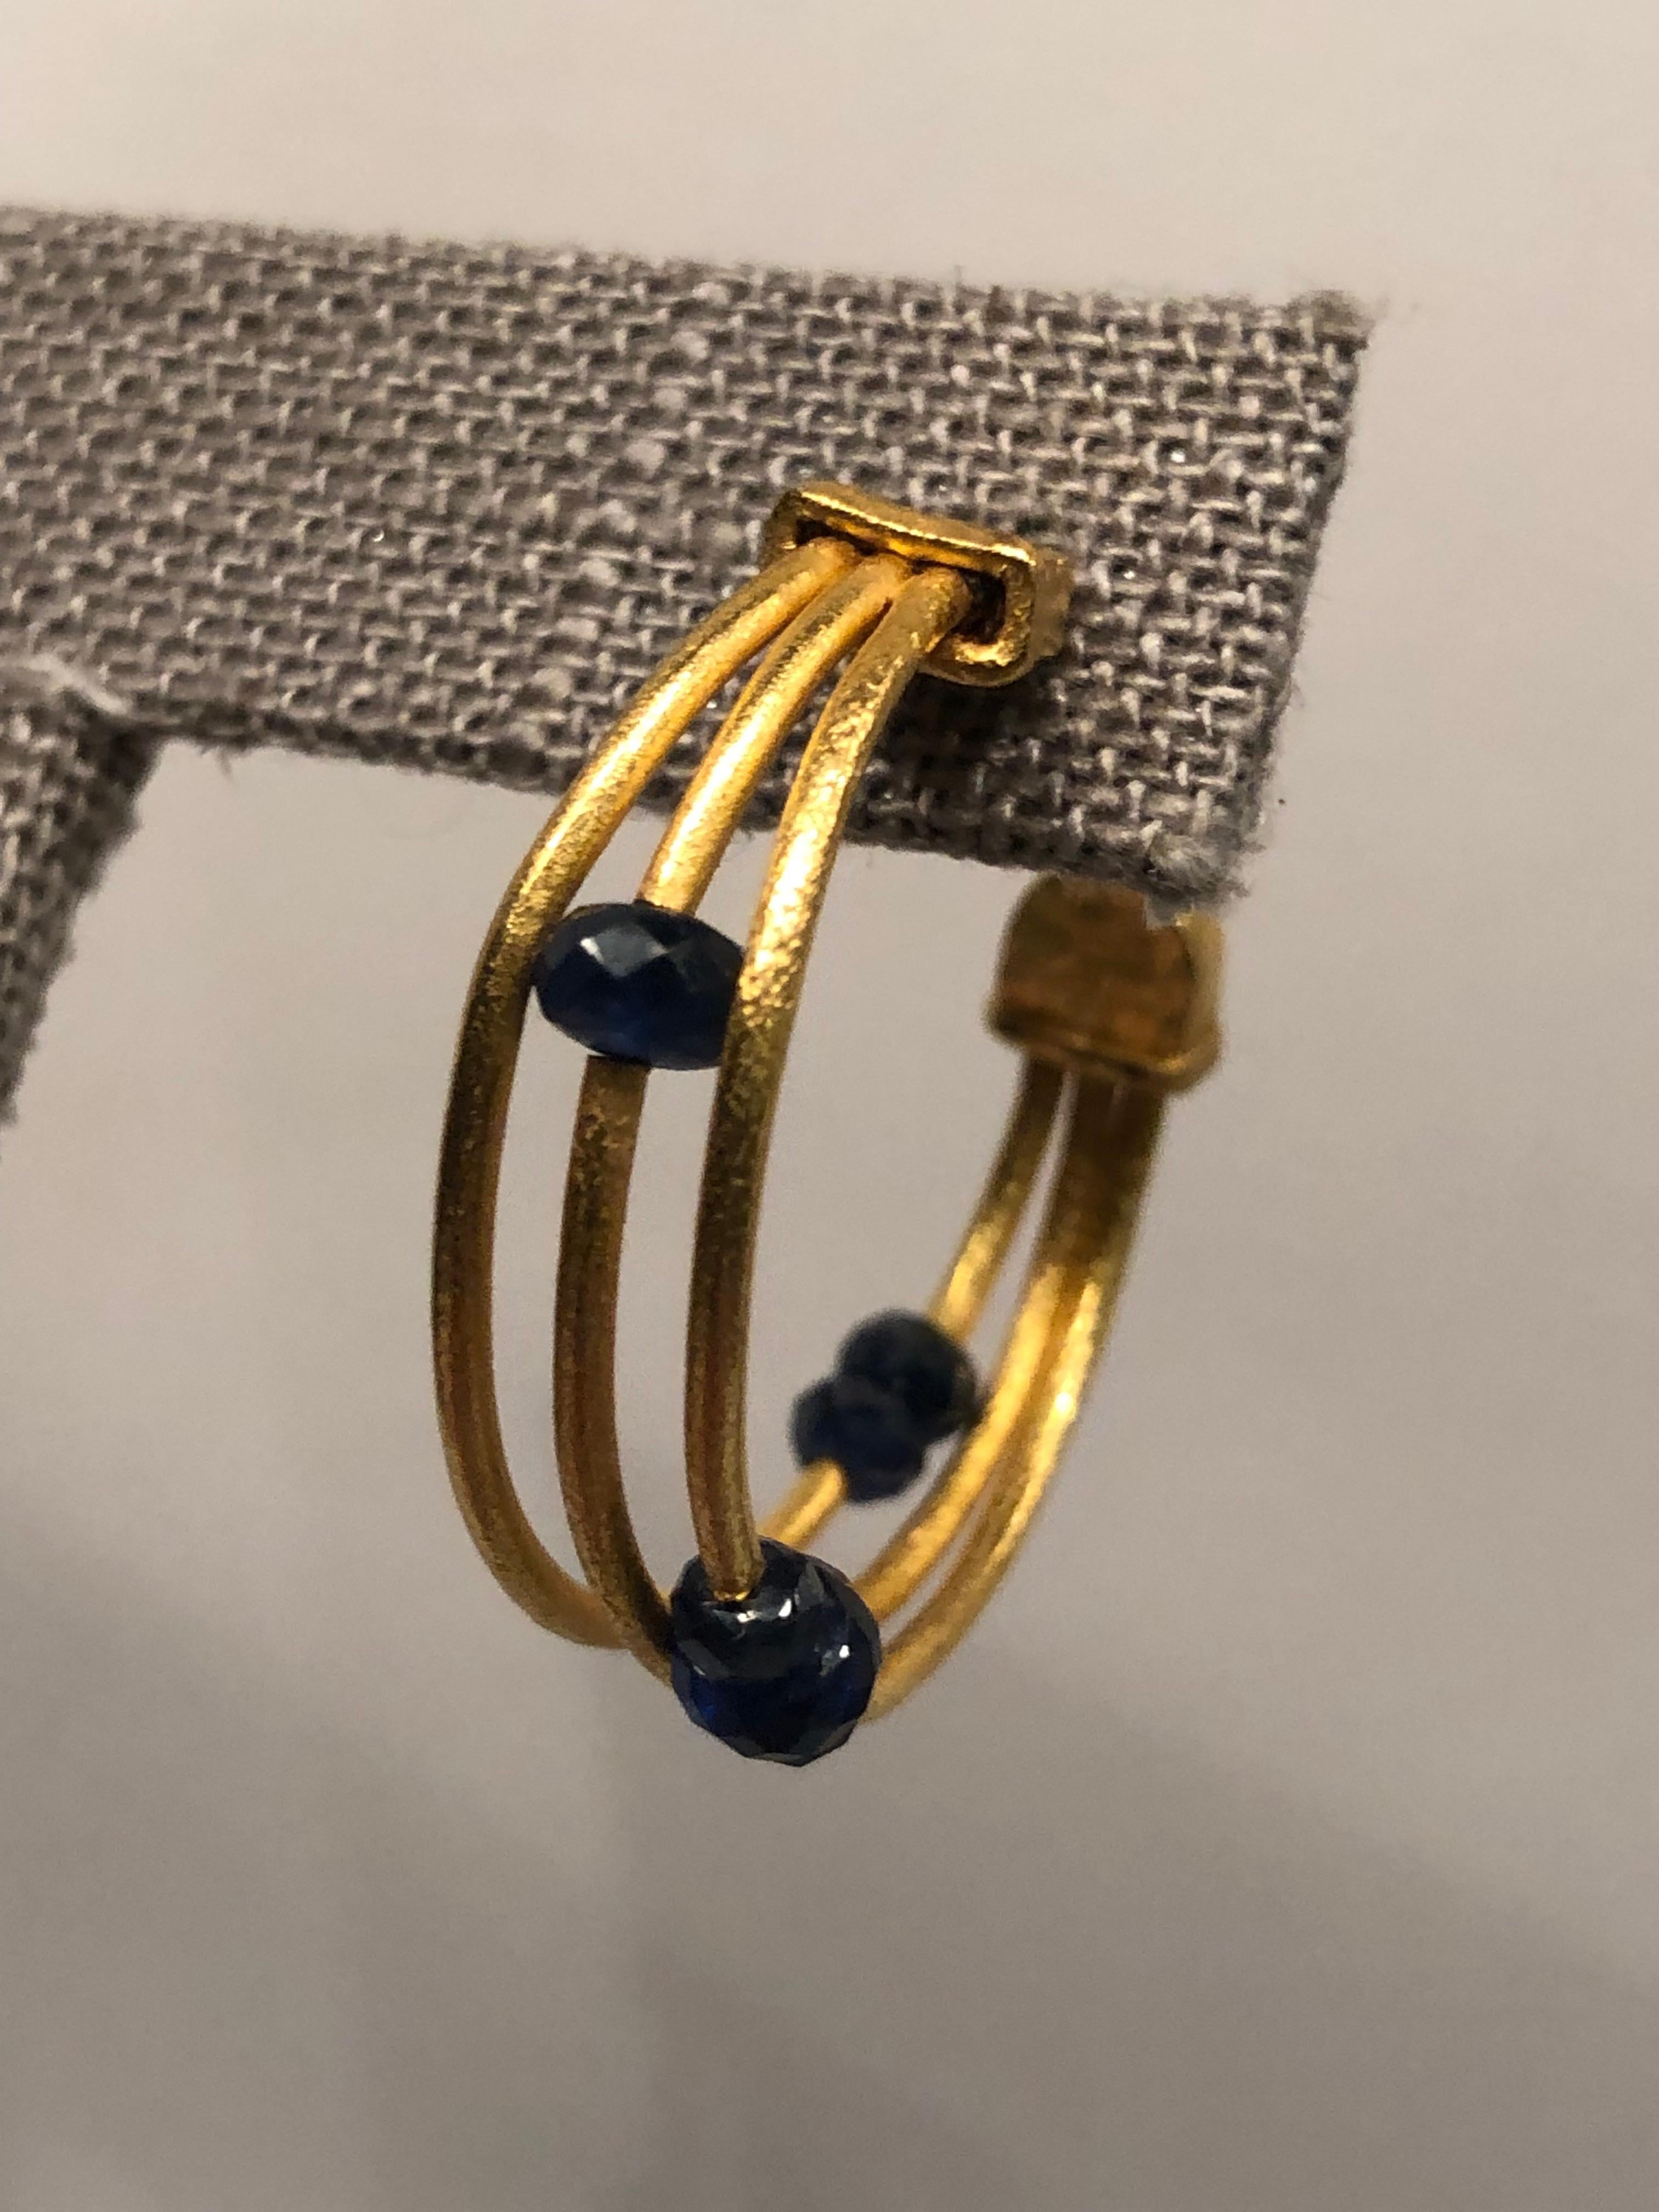 One of a kind hand forged and fabricated Gurhan gold hoops.

24k yellow gold
Dark Blue rose cut saphires
Lightly worn and in excellent condition

